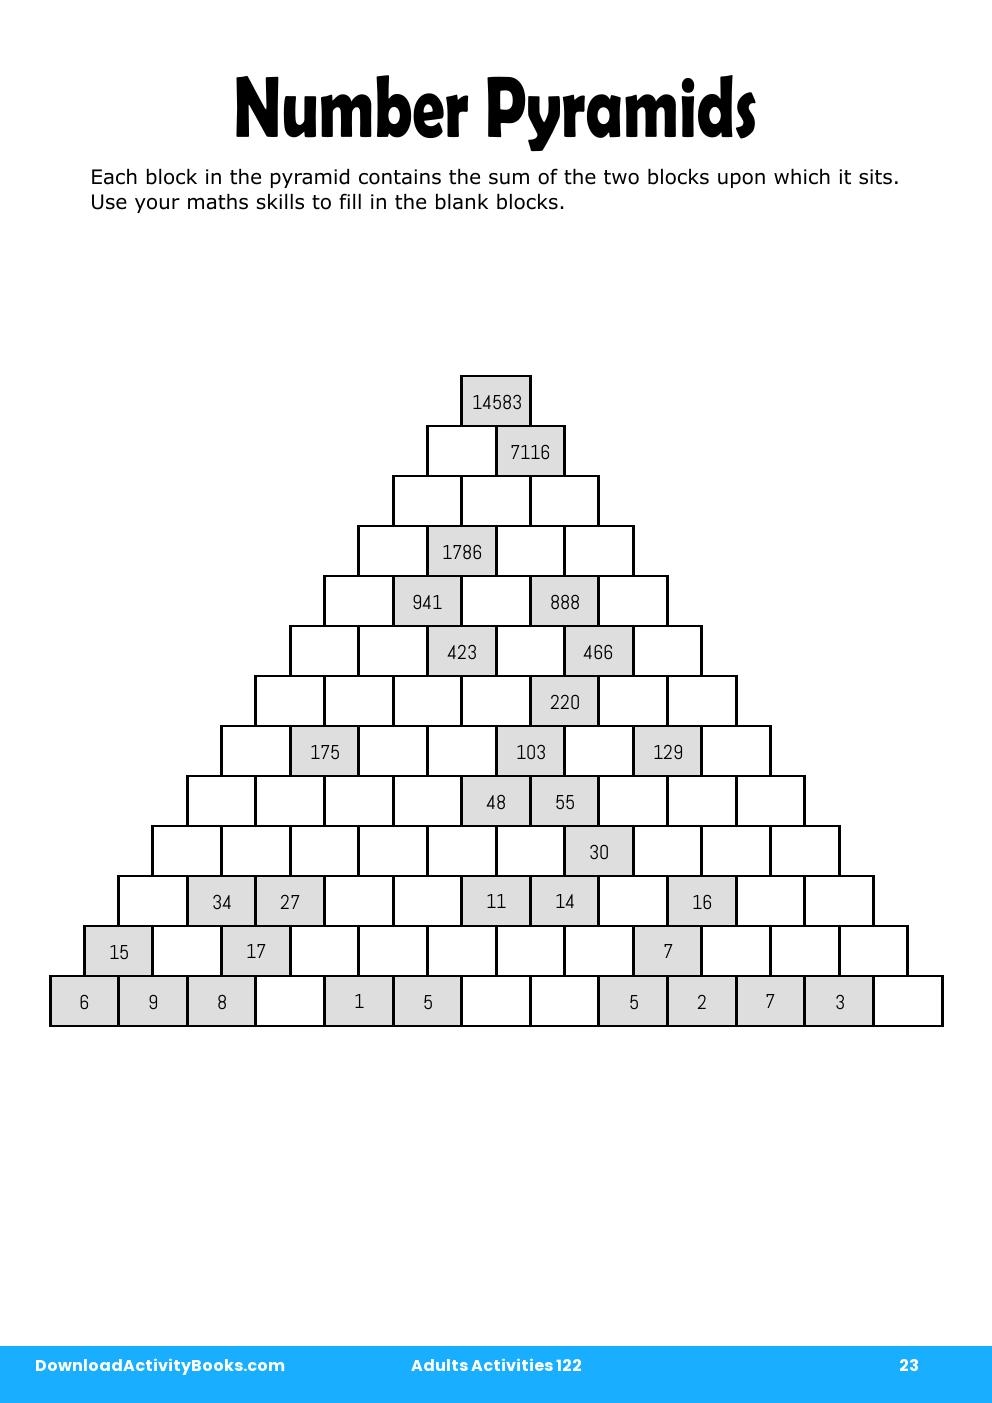 Number Pyramids in Adults Activities 122